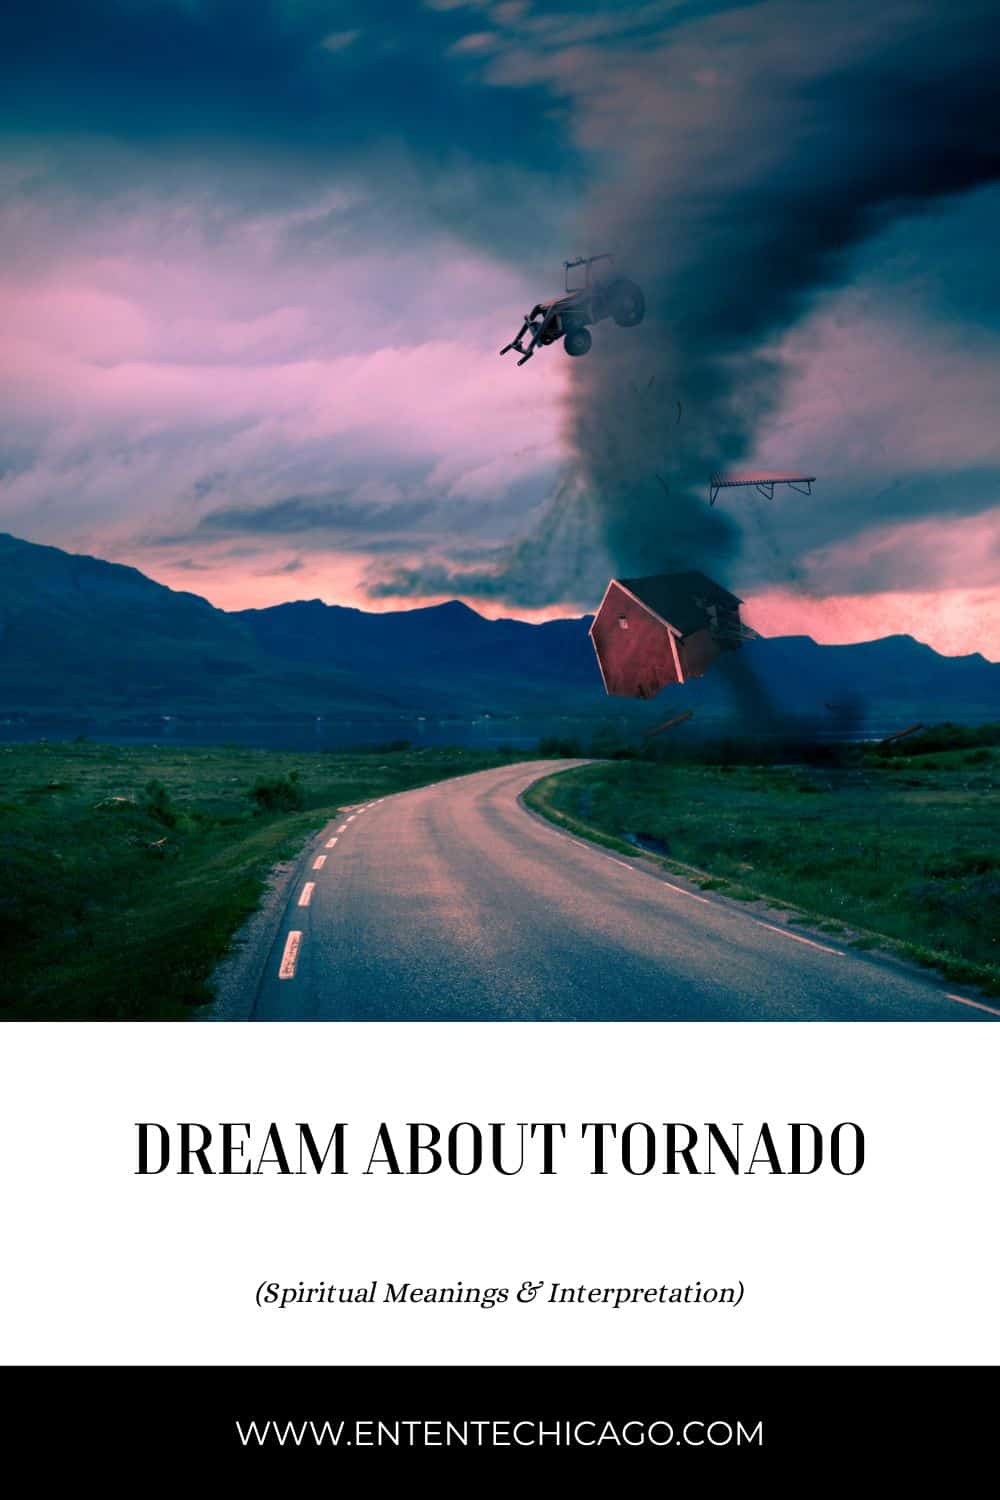 What Does It Mean To Dream About Tornado